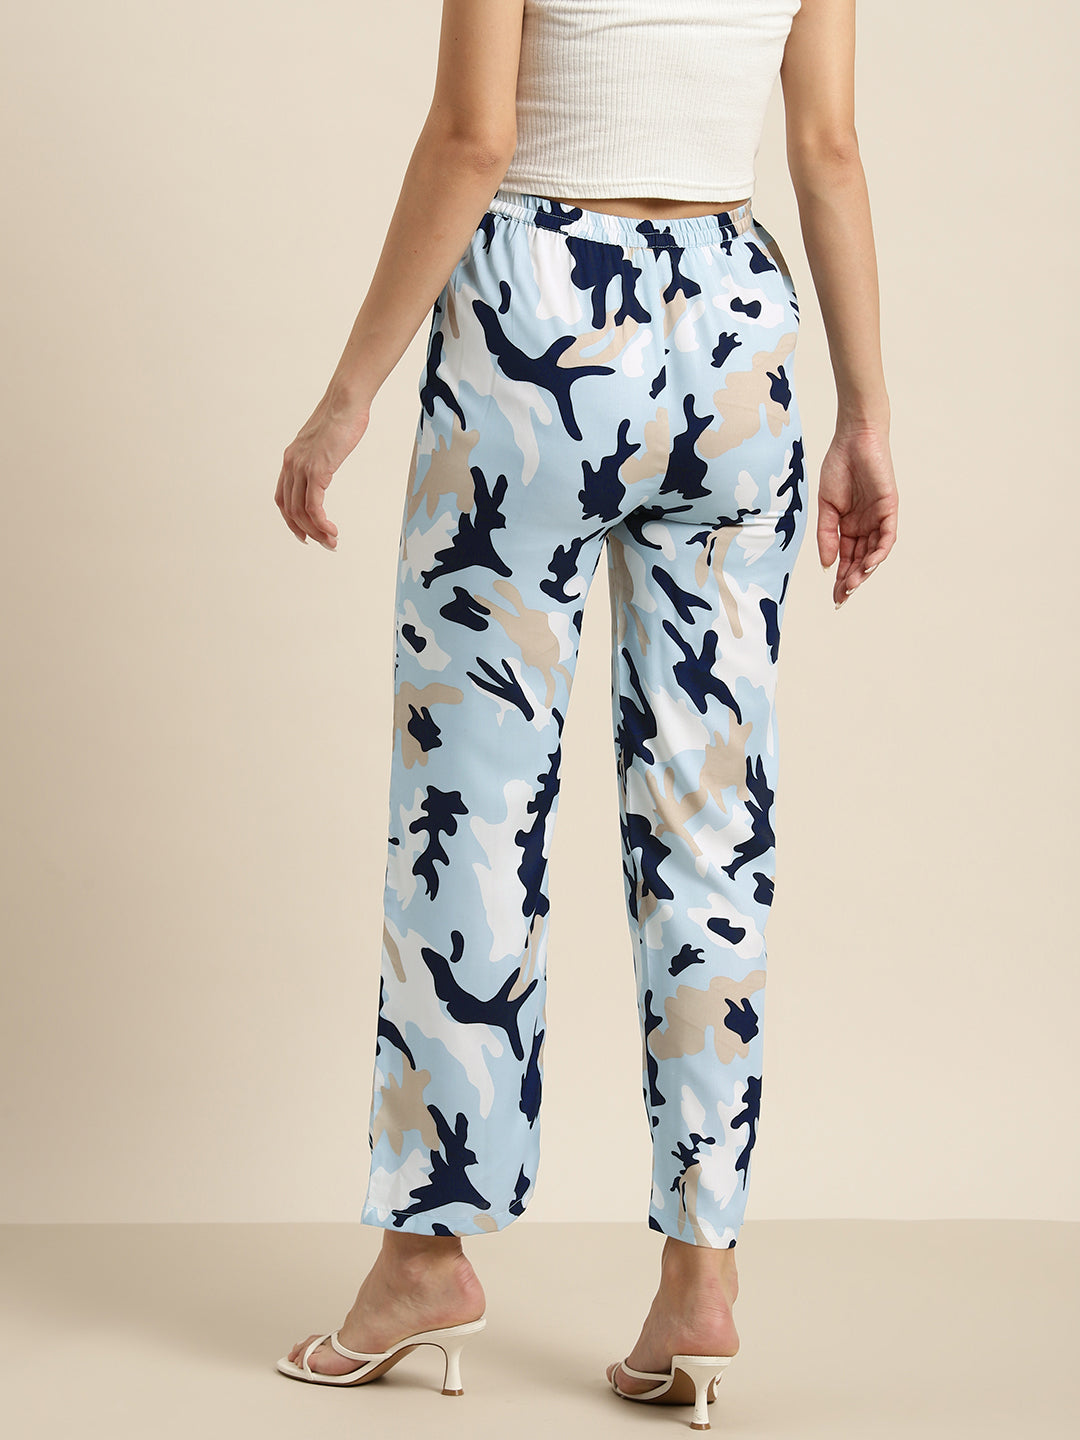 Sky blue camouflage print Trouser